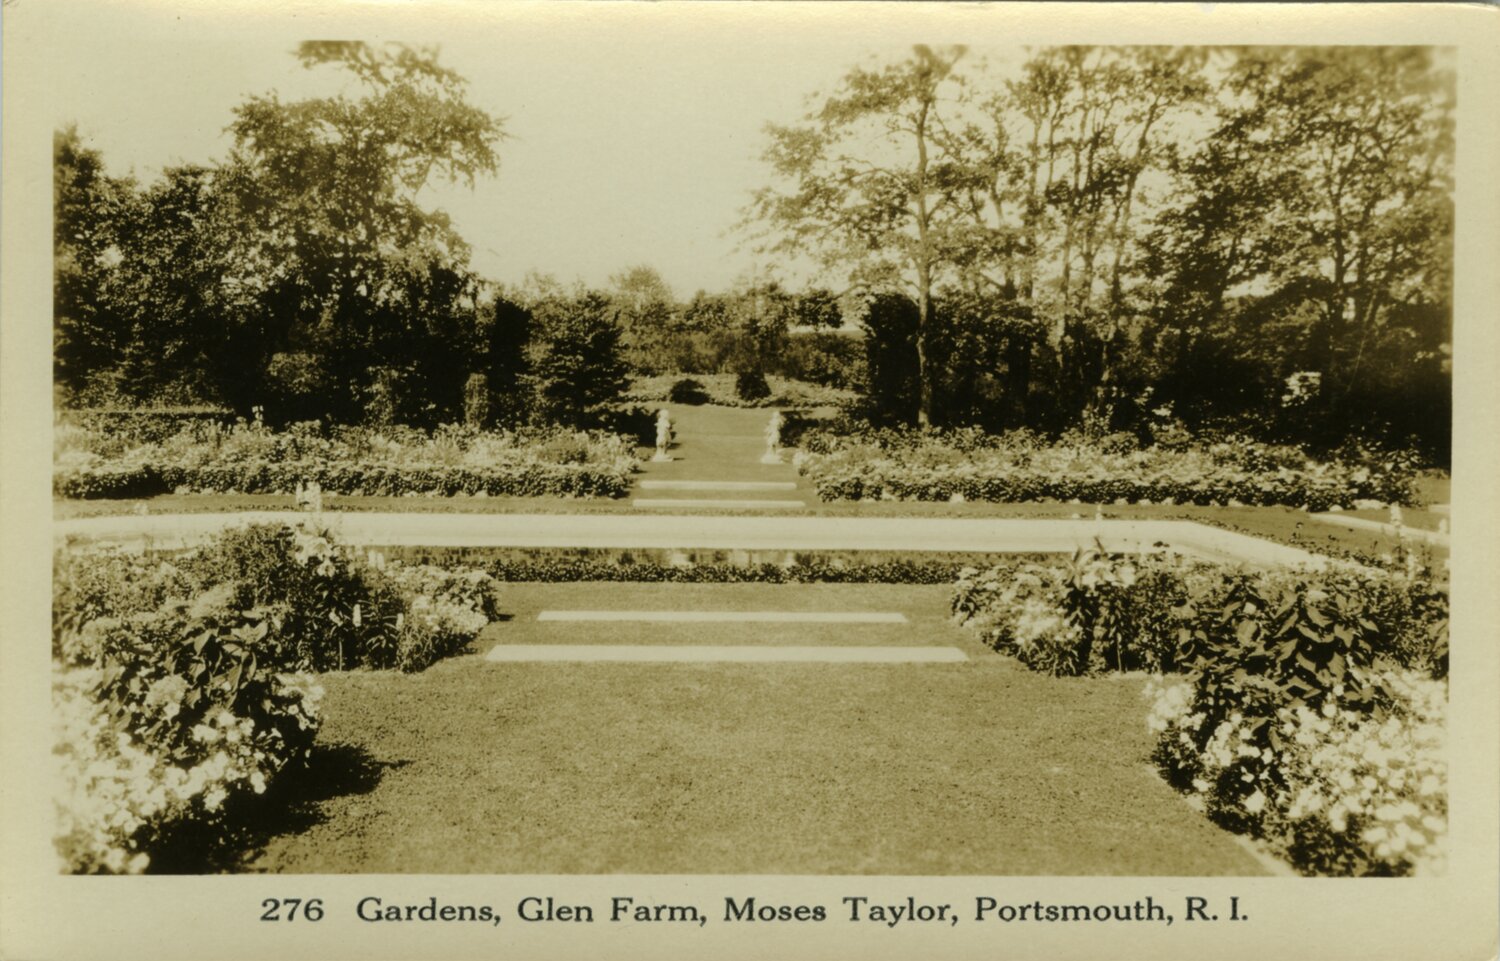 The gardens outside the Glen Manor House are the subject of this vintage postcard.